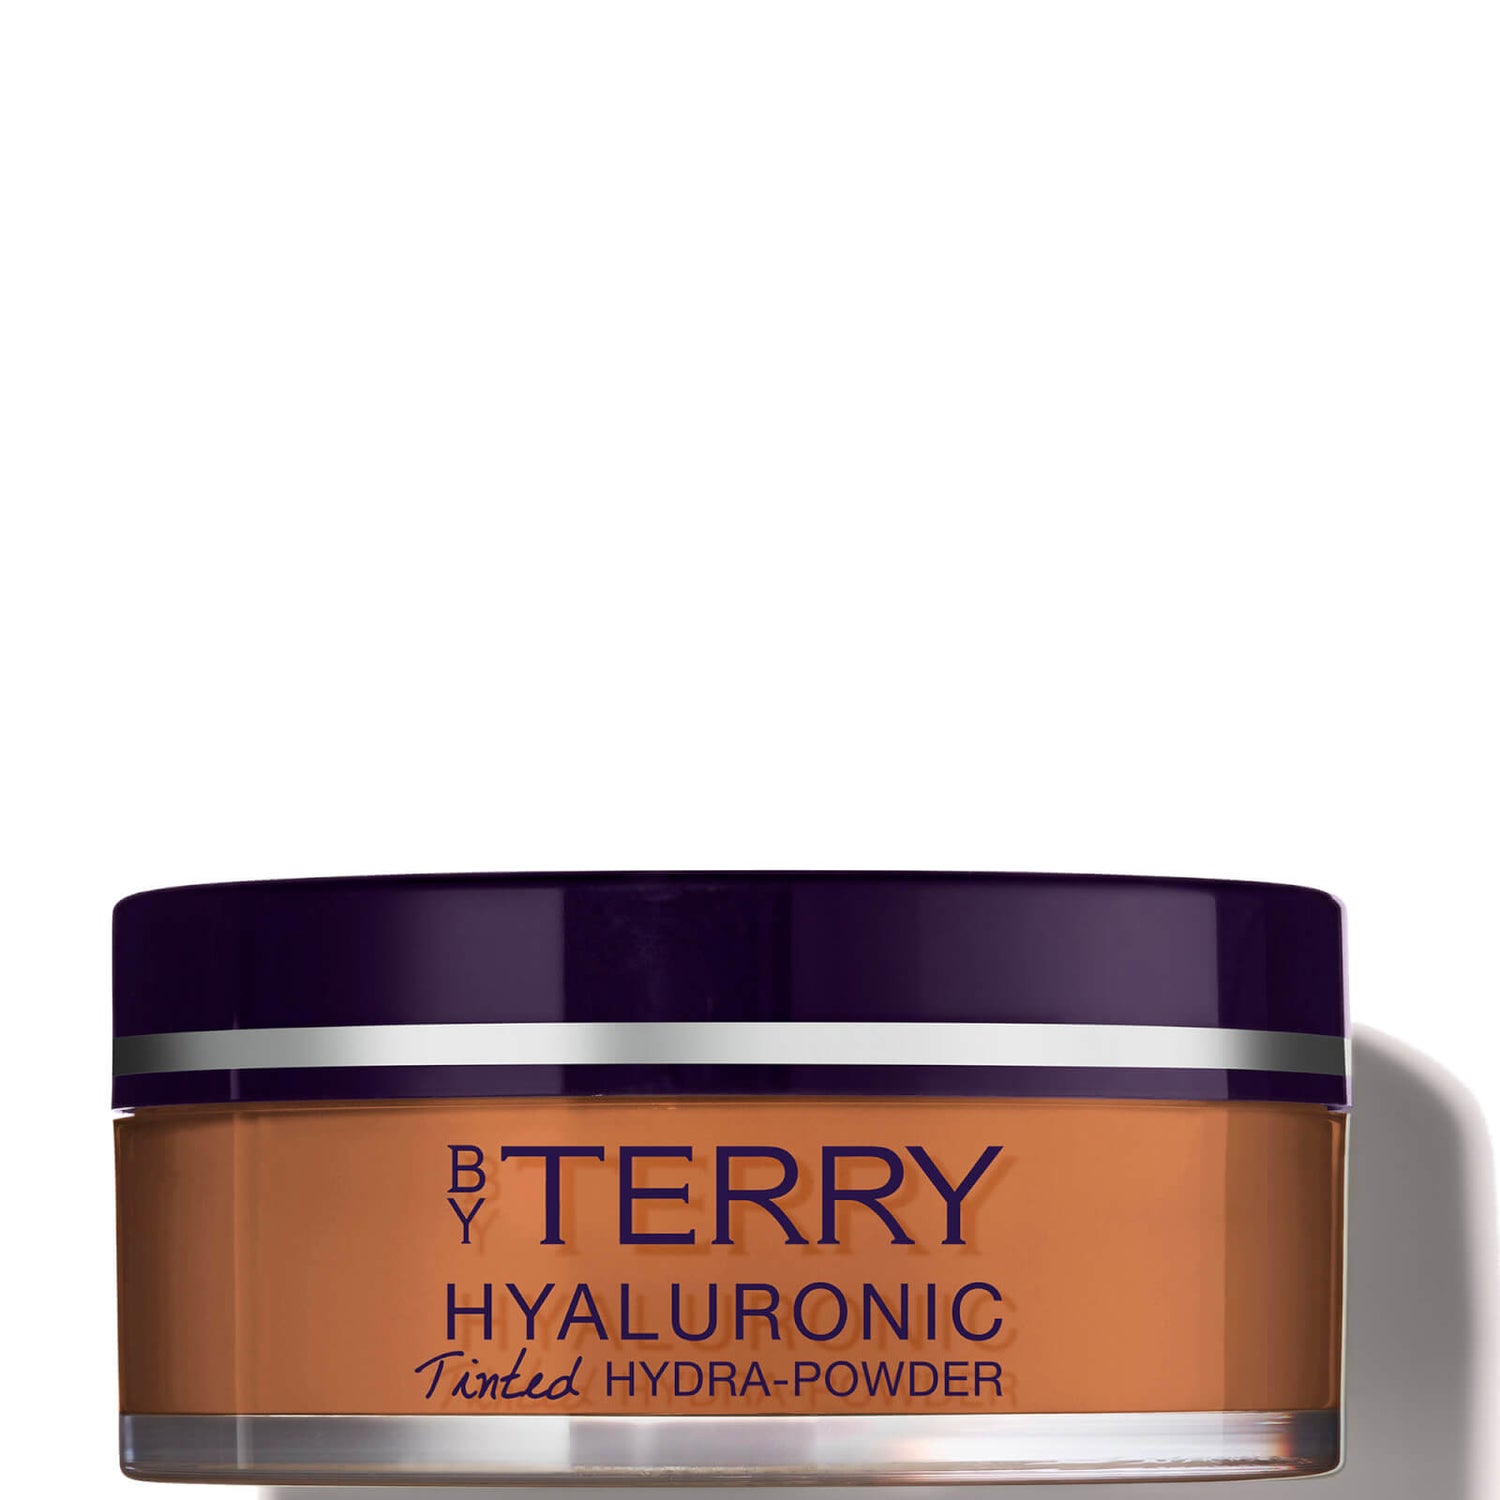 By Terry Hyaluronic Tinted Hydra-Powder 10g (Various Shades)